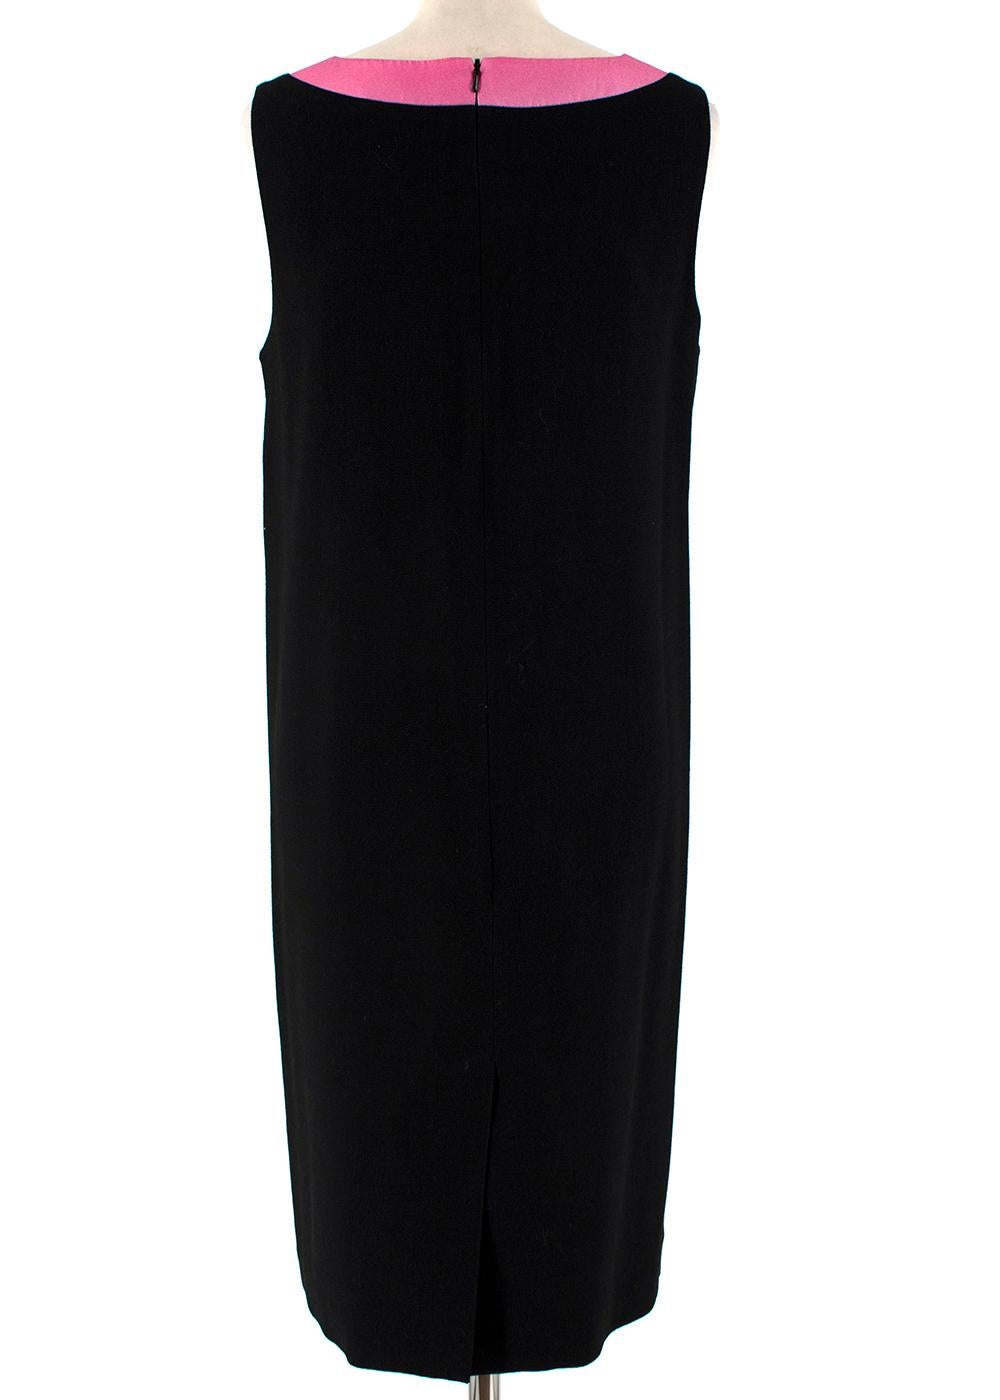 Christopher Kane Rainbow Collar Black Wool Dress - Size US 8 In Excellent Condition For Sale In London, GB